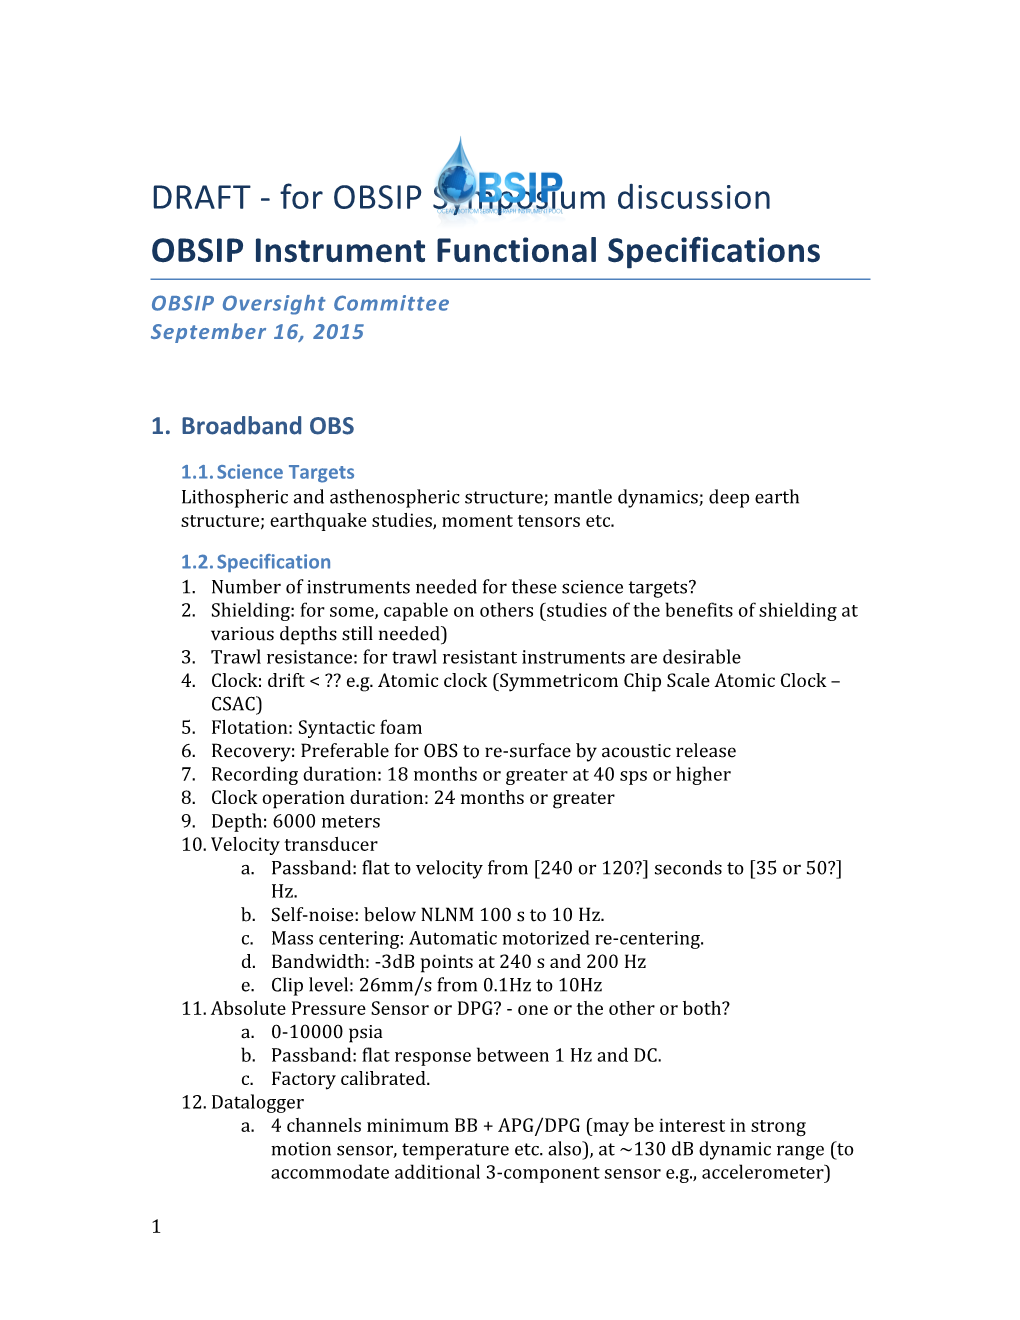 OBSIP Instrument Functional Specifications